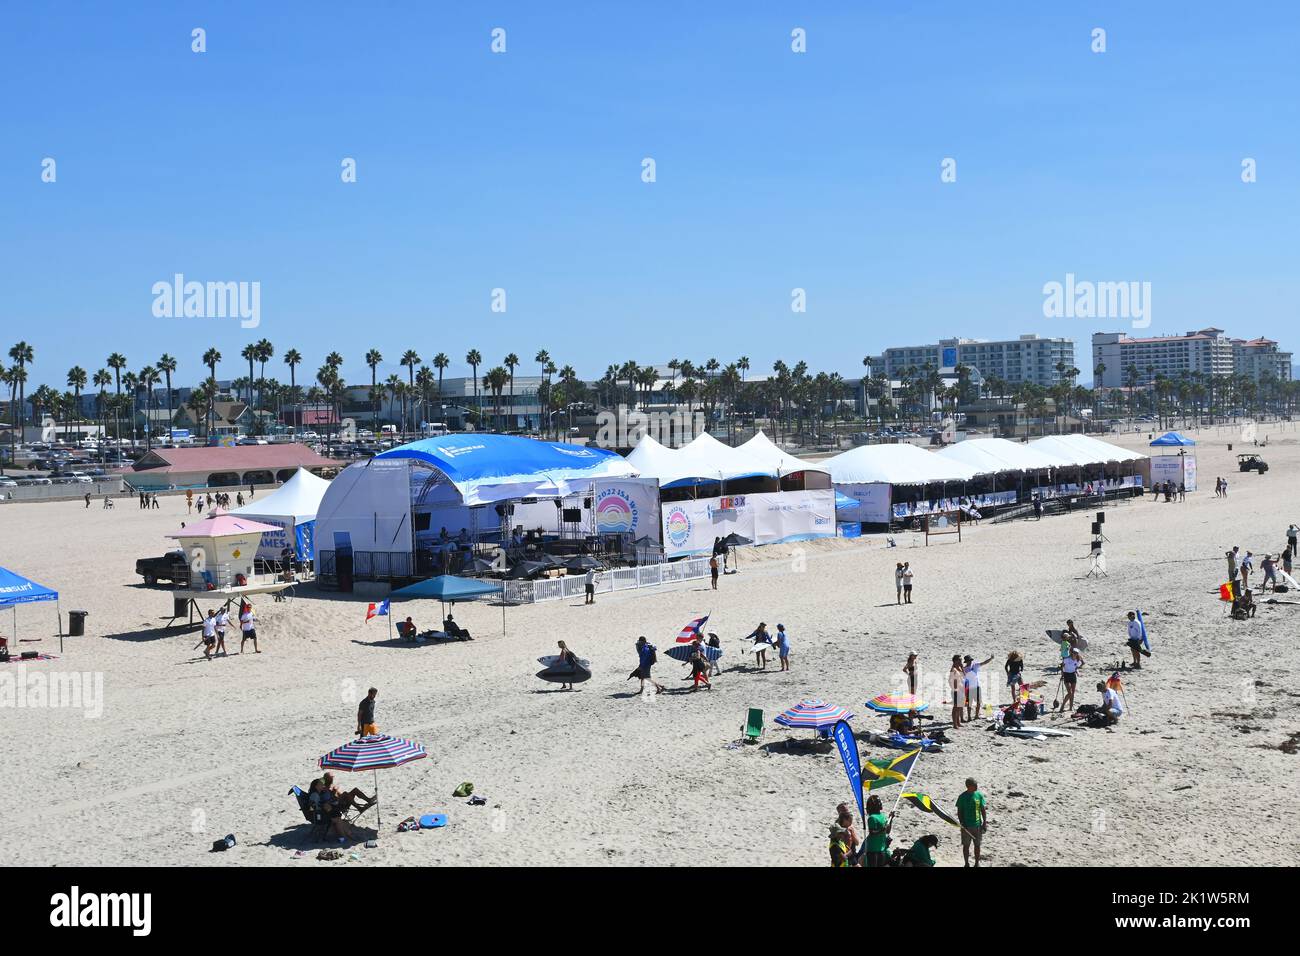 HUNTINGTON BEACH, CALIFORNIA, 19 SEPT 2022: Tents and pop-ups for the International Surfing Association competition at the Pier in Huntington Beach. Stock Photo